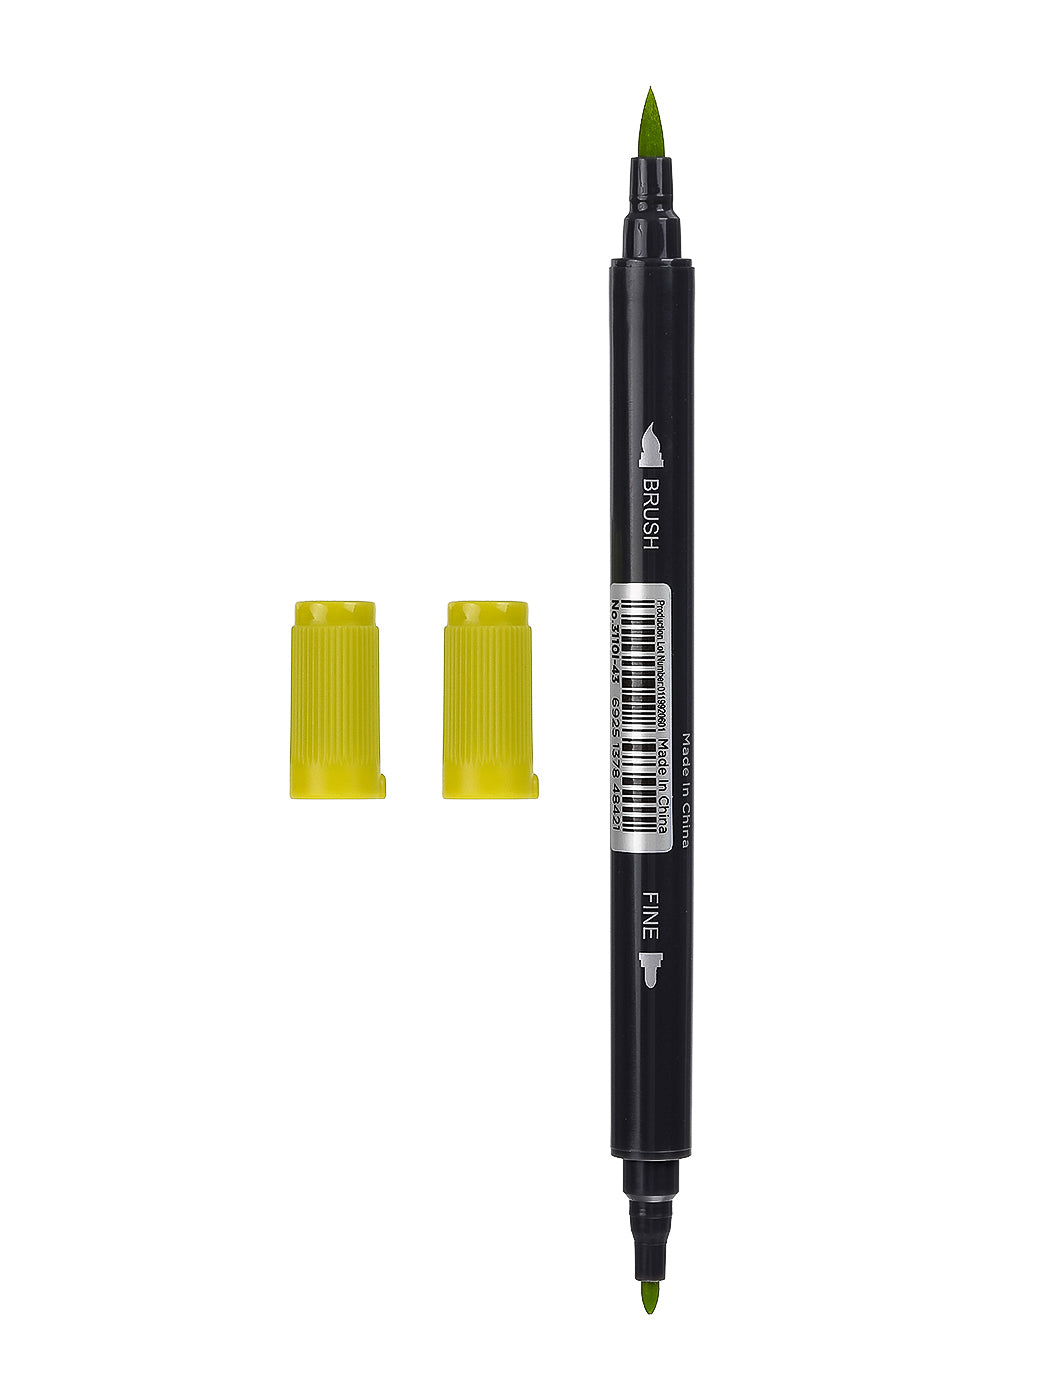 MINISO WATER SOLUBLE DOUBLE HEADED COLORED PEN (LEMON YELLOW) 0400013121 MARKER